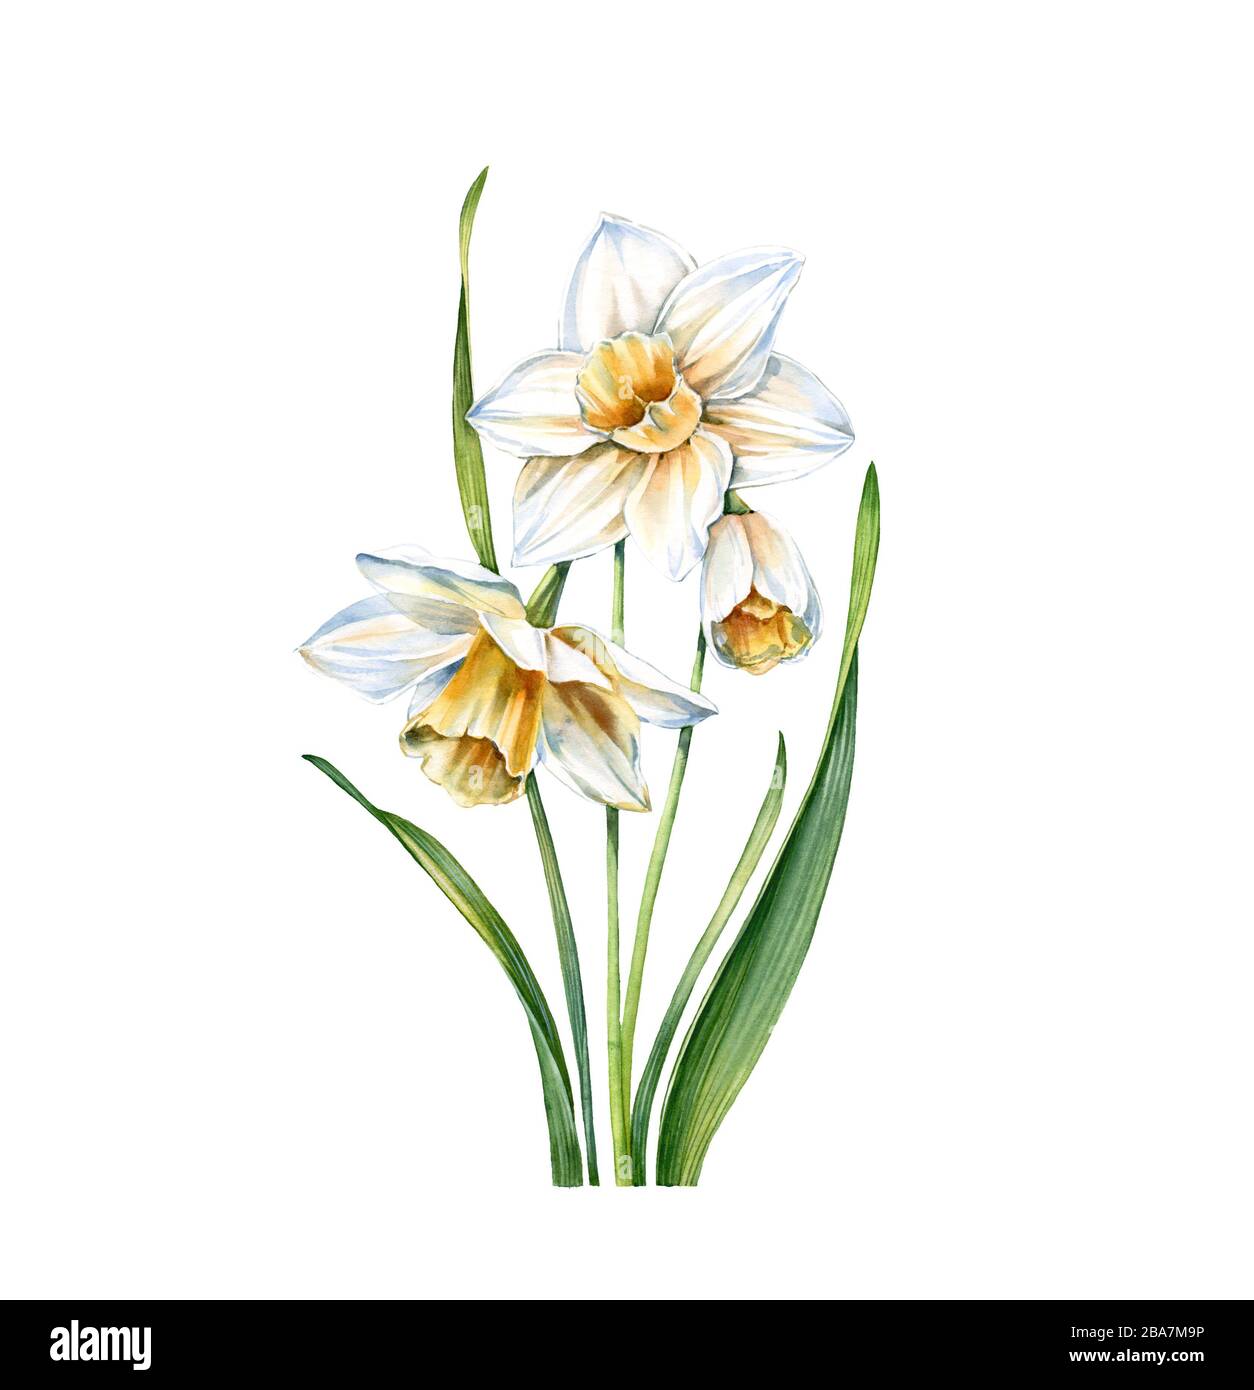 Watercolor white daffodil. Realistic narcissus plant isolated on white. Three flowers and leaves. Botanical floral illustration for wedding design Stock Photo